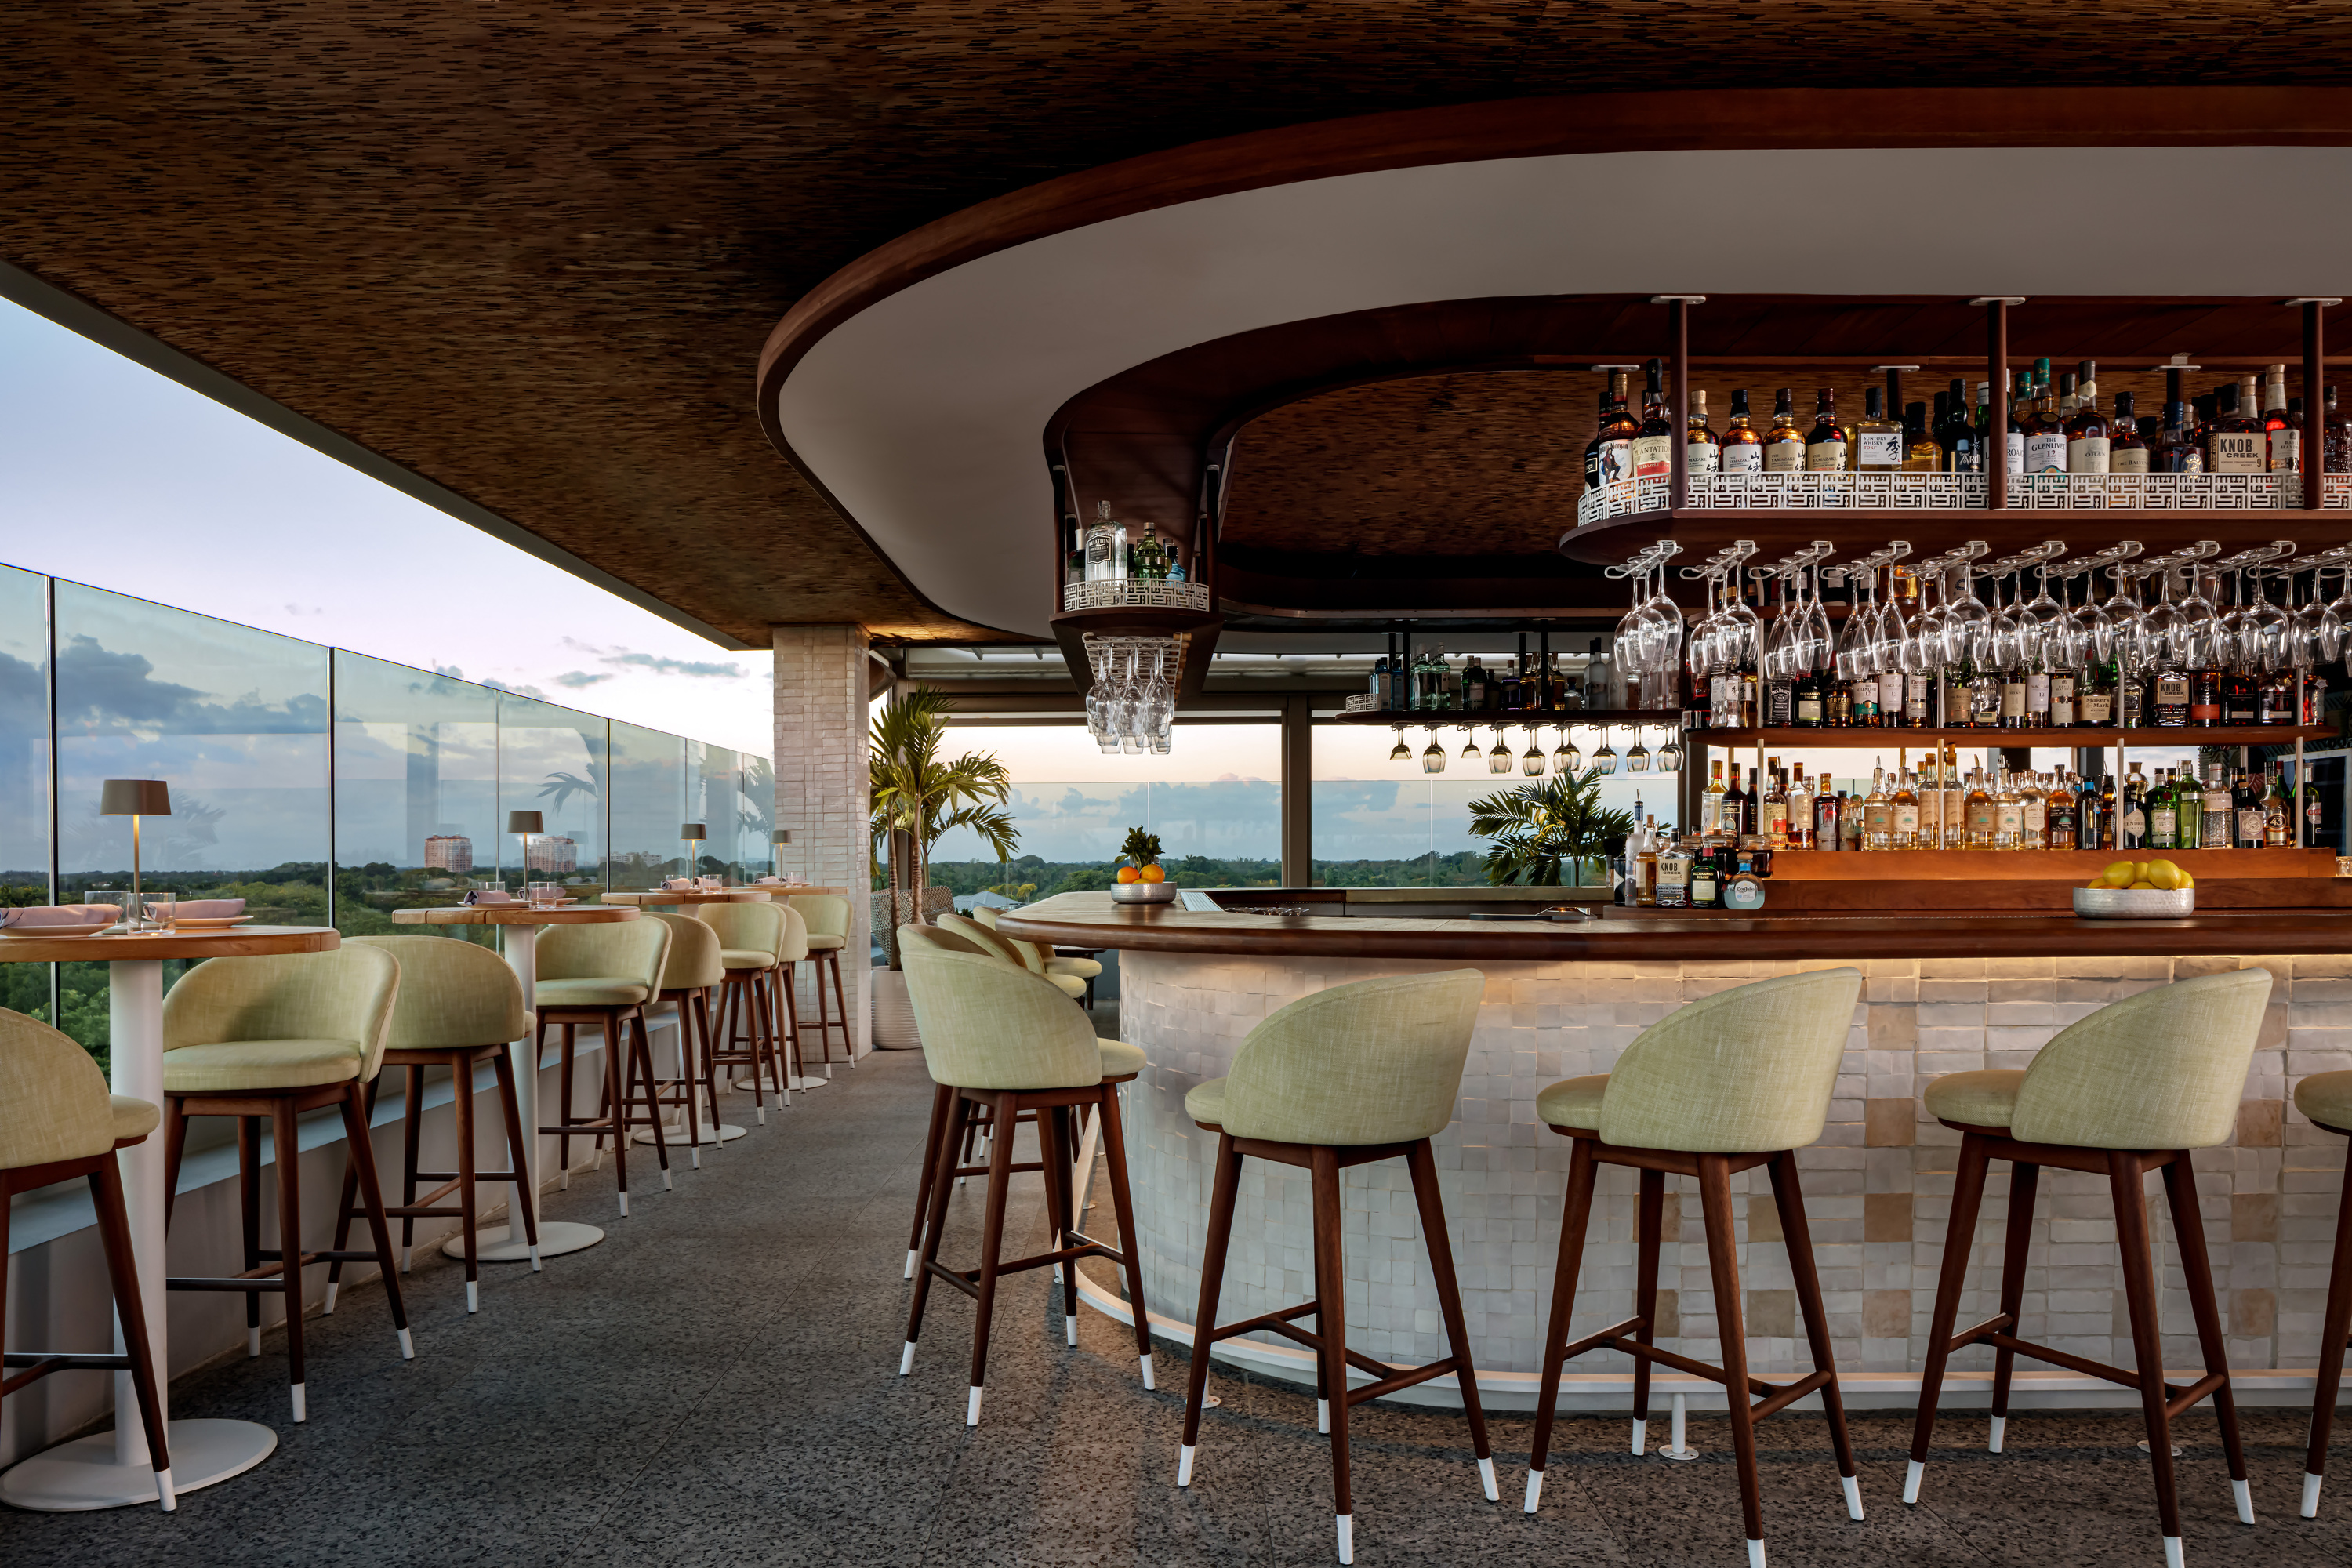 Review: Level 6 Rooftop Is Easy On The Eyes—But Does It Have Staying Power?